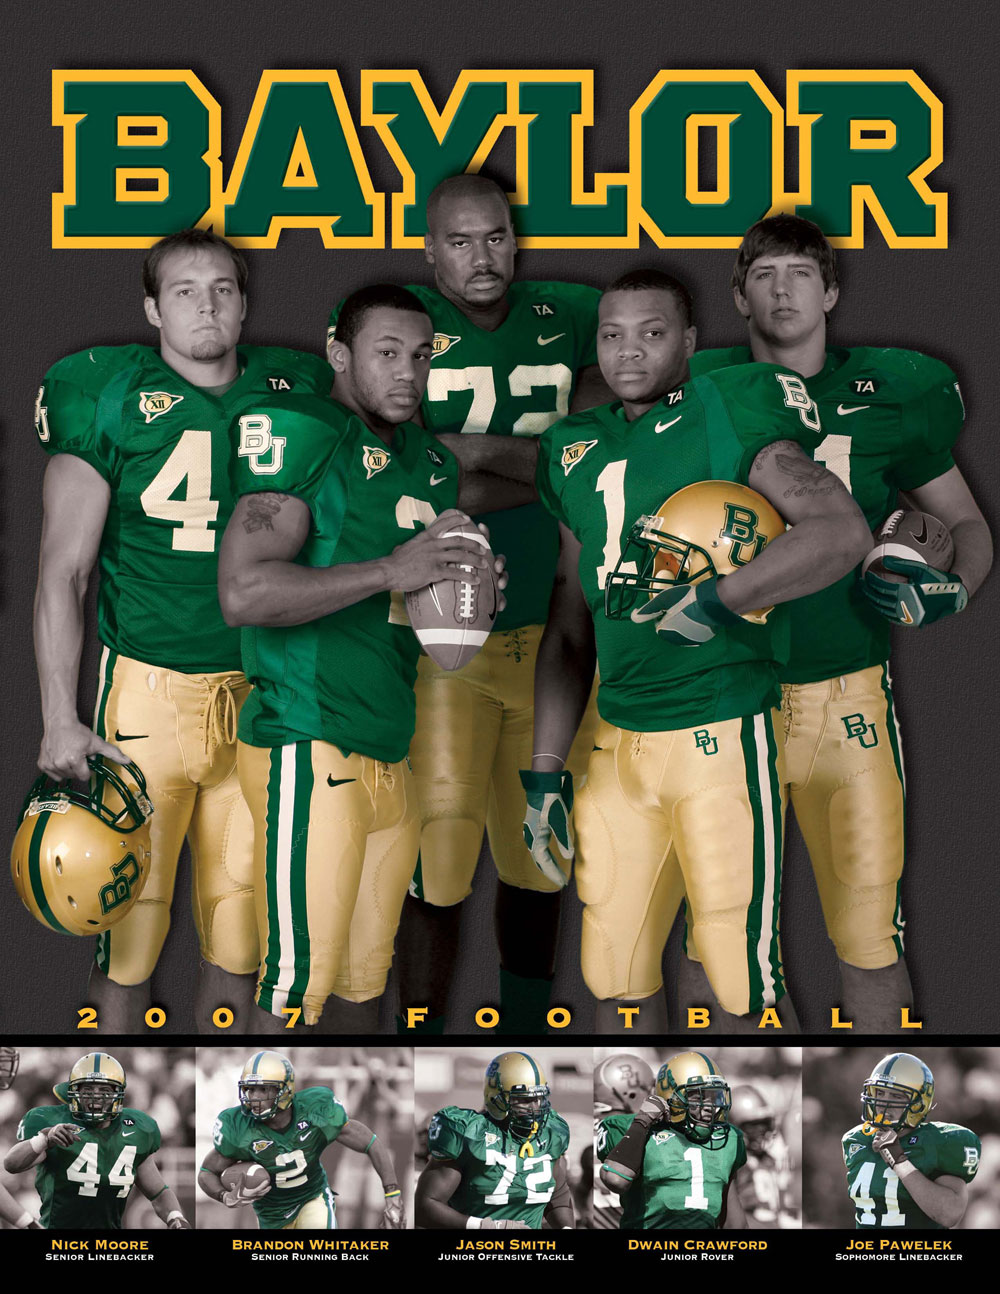 Baylor Official Athletic Site Football